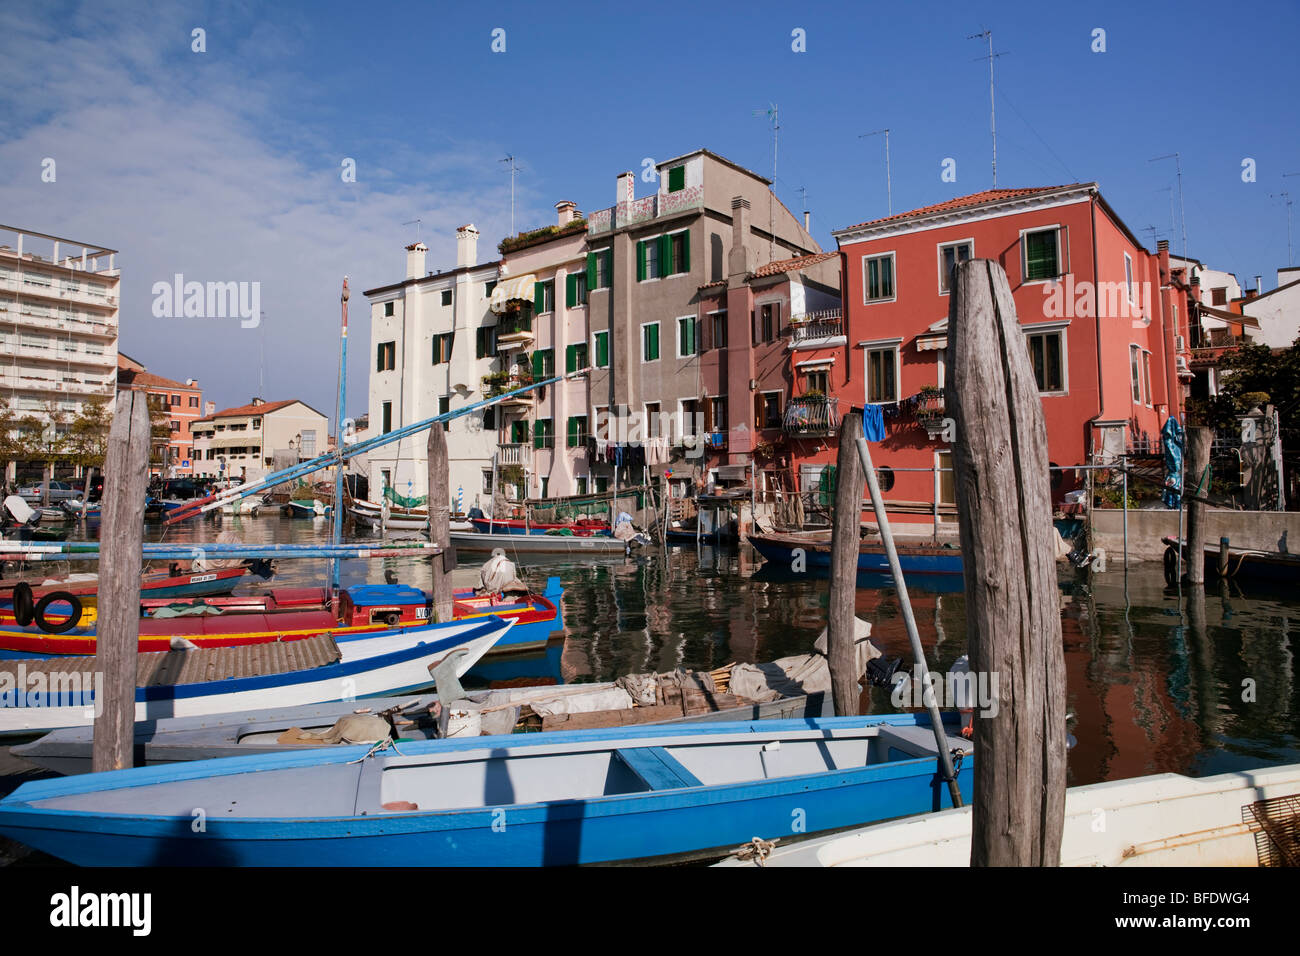 Chioggia, Historical town known for its fish market near Venice, Italy Stock Photo